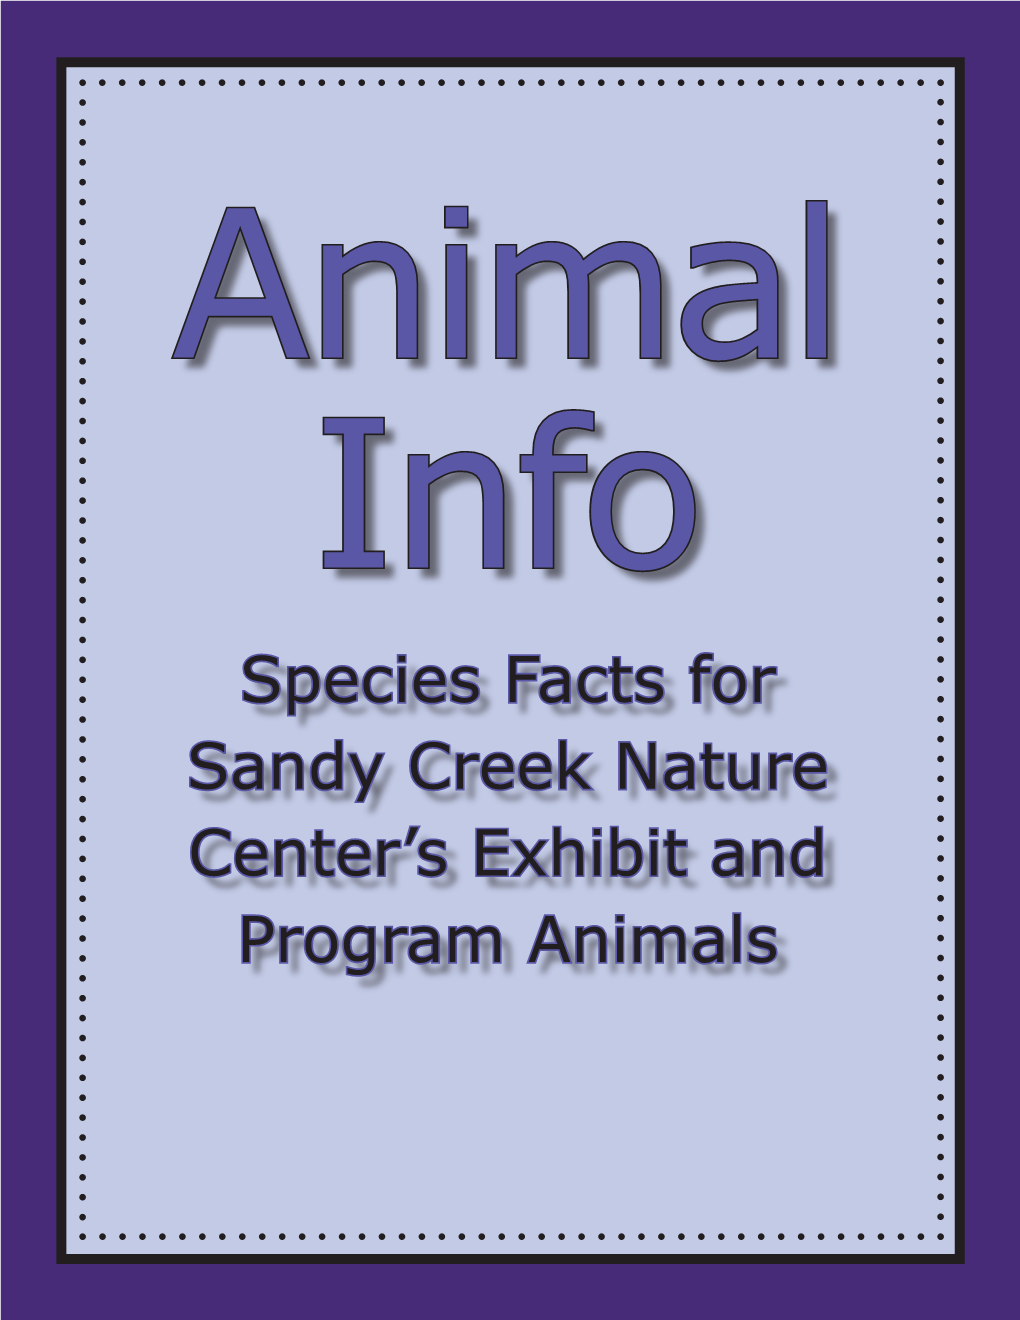 Species Facts for Sandy Creek Nature Center's Exhibit and Program